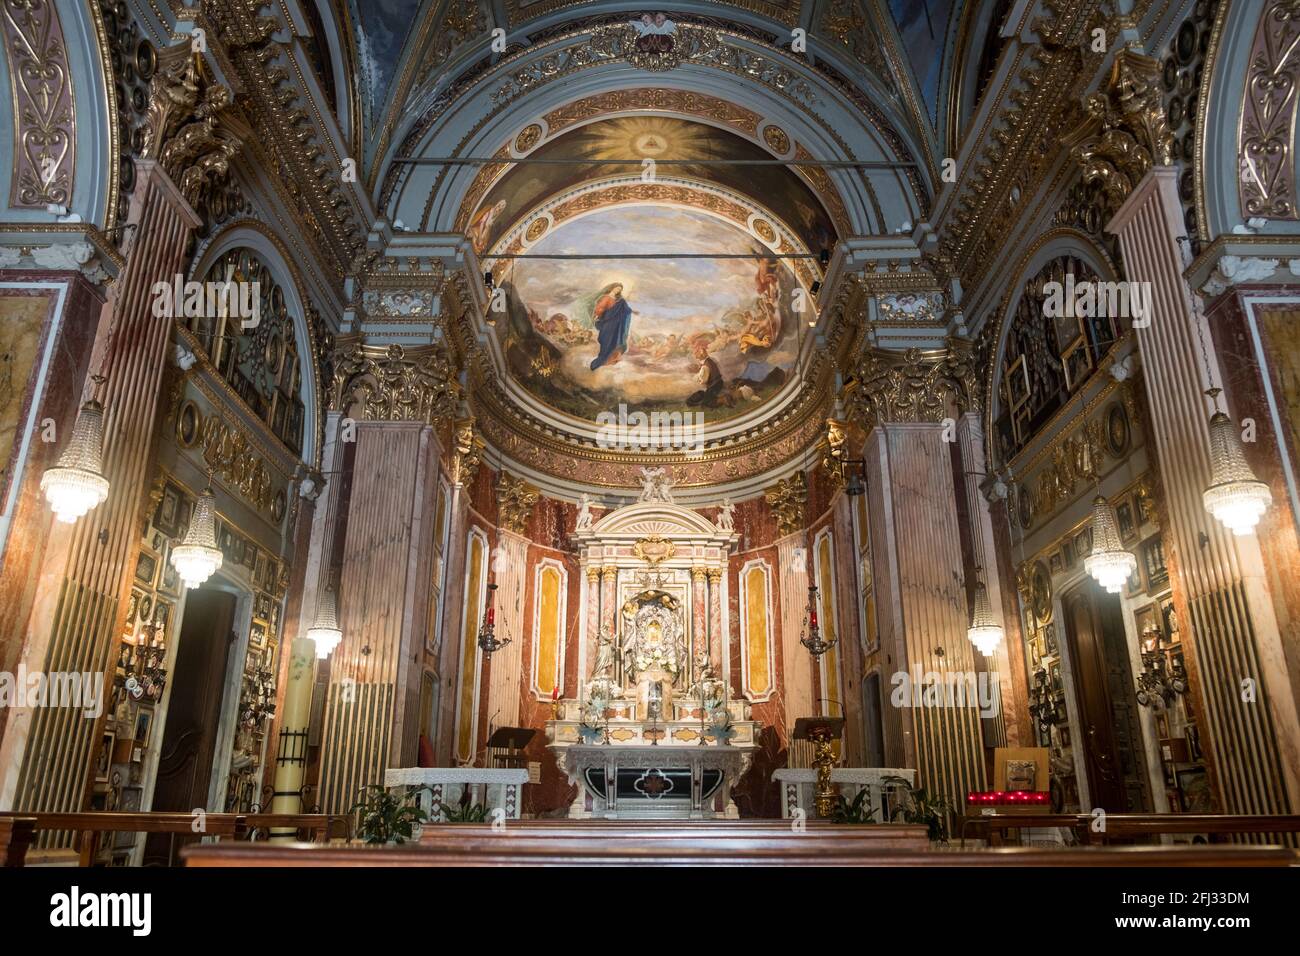 Interior of the Sanctuary of Our Lady of Montallegro, with wealthy decoration, the central altar and a fresco. Stock Photo